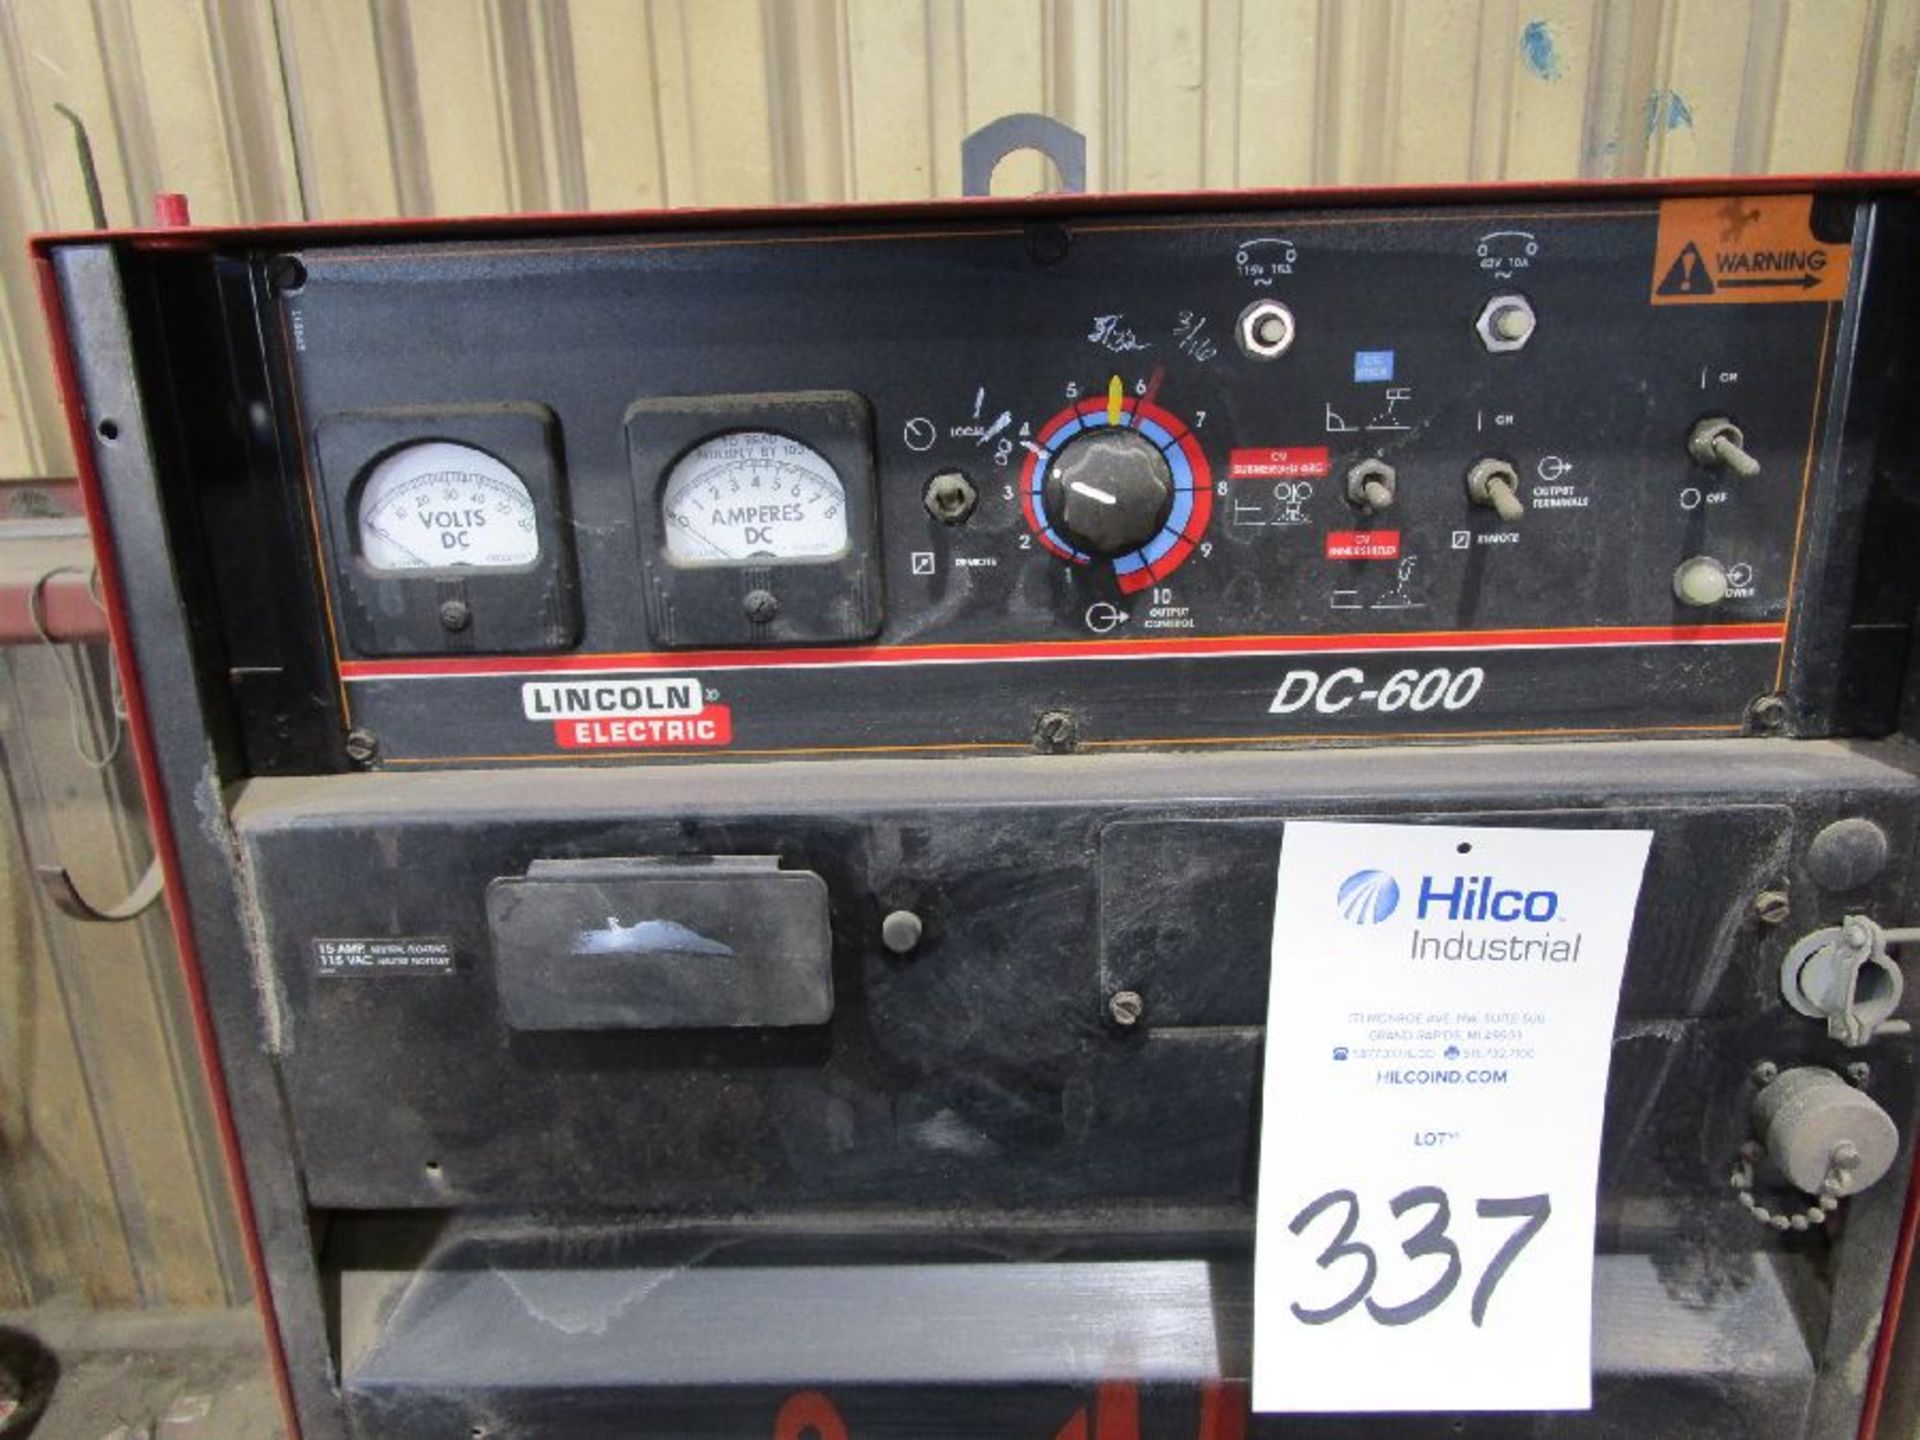 Lincoln Model DC-600 Submerged Arc Welding Power Source - Image 4 of 6